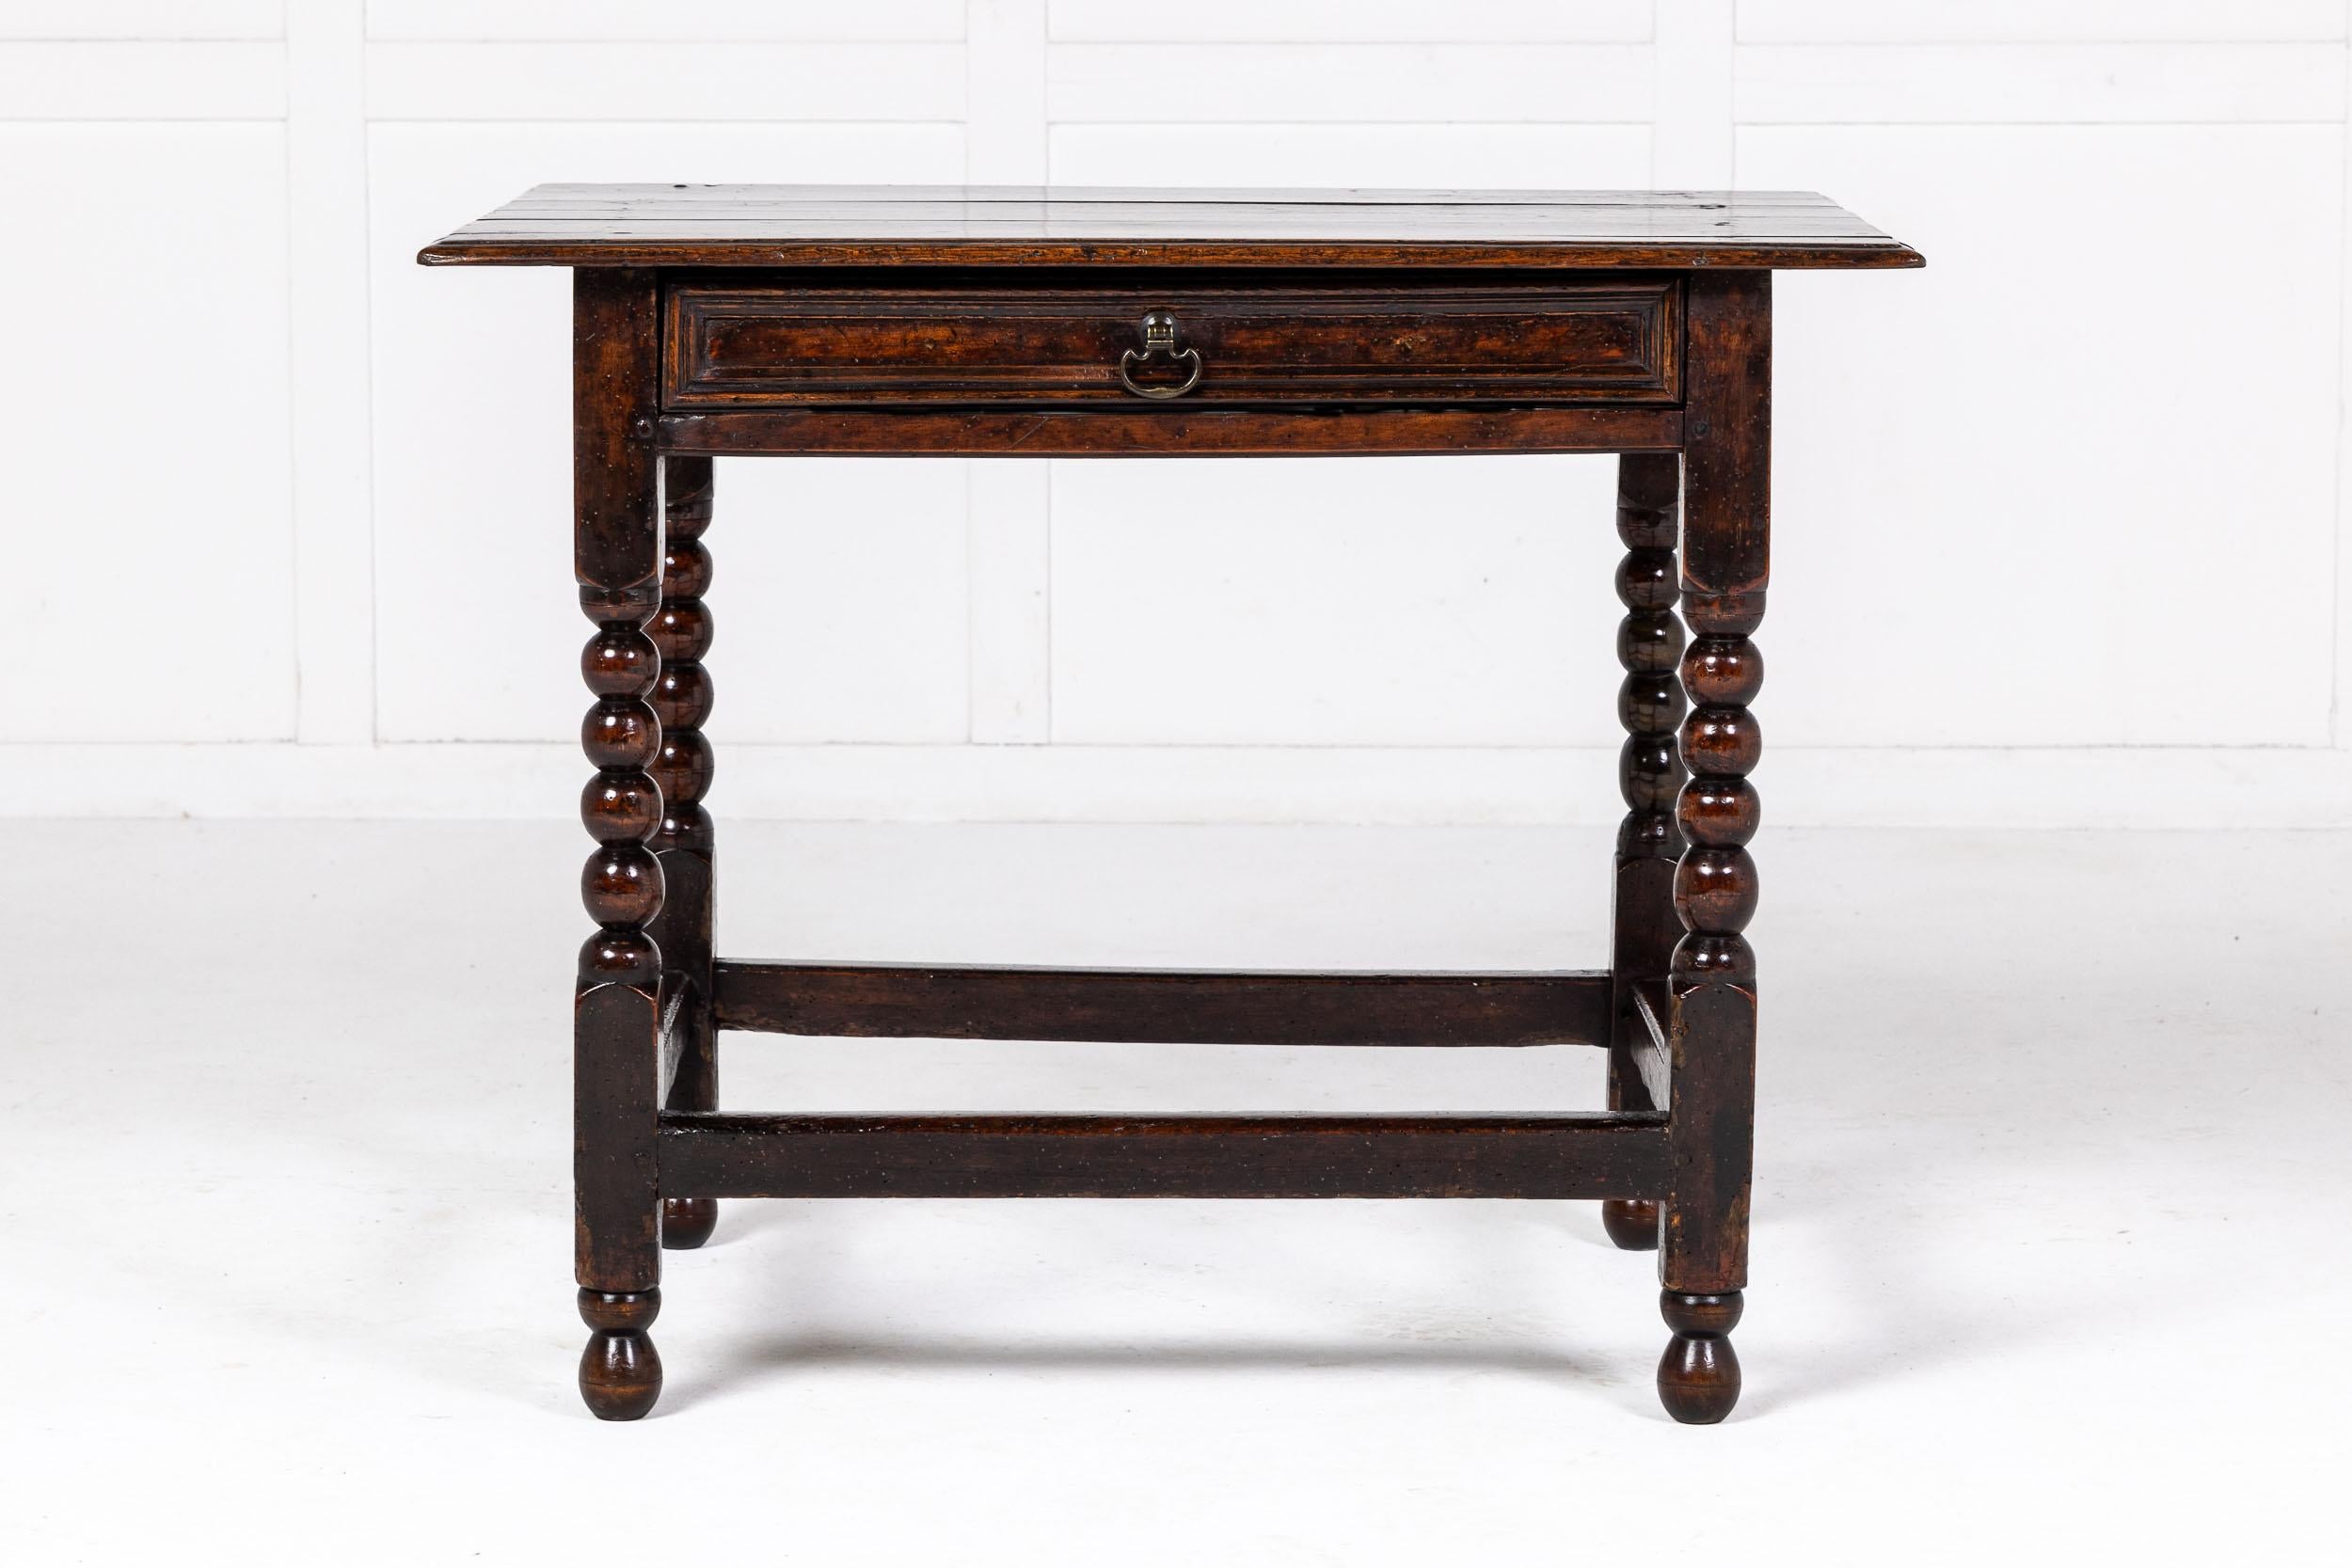 A Fine and Small 17th Century English Oak Side or Occasional Table.

The fine three planked overhanging top above a single drawer with panelled detailing, supported by square legs with bobbin turned elements. The legs joined by an H-form stretcher